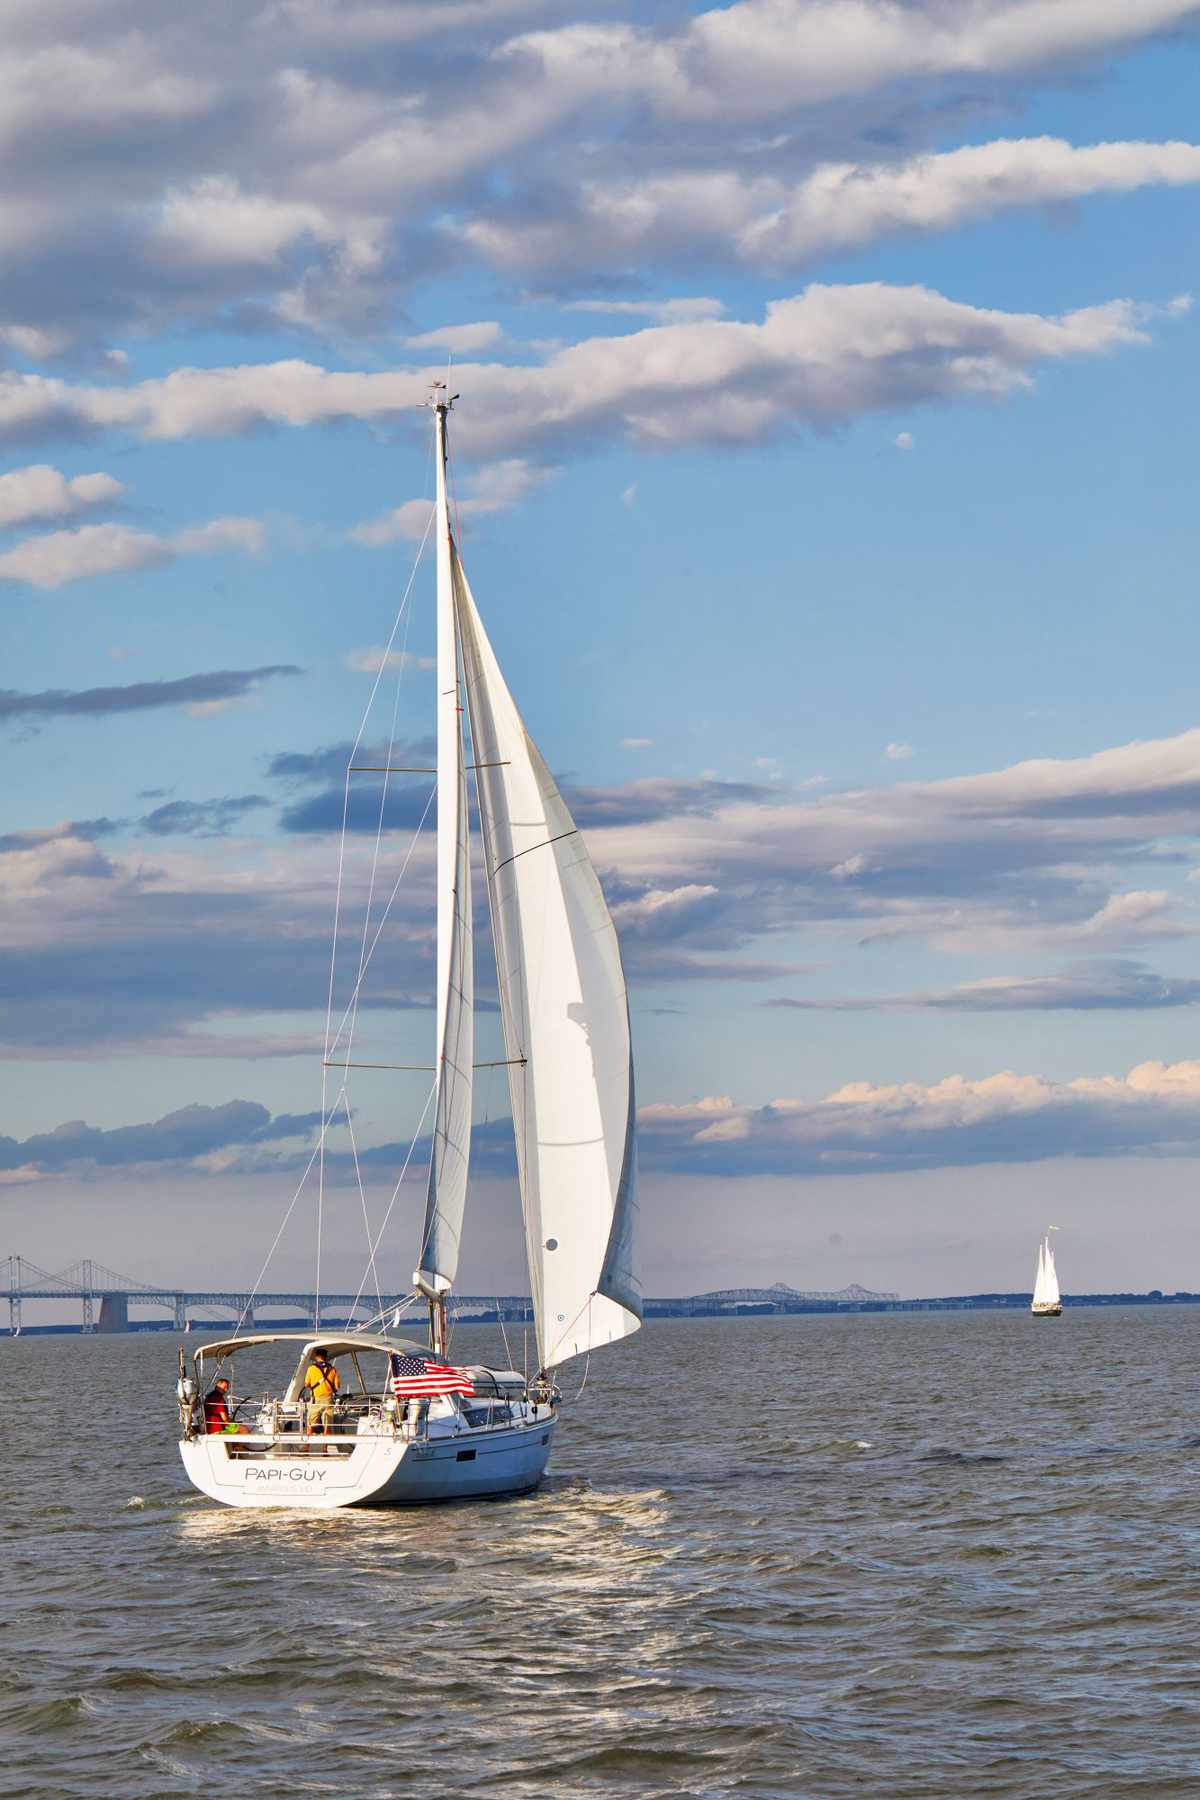 Sailboat in the Chesapeake Bay off Annapolis